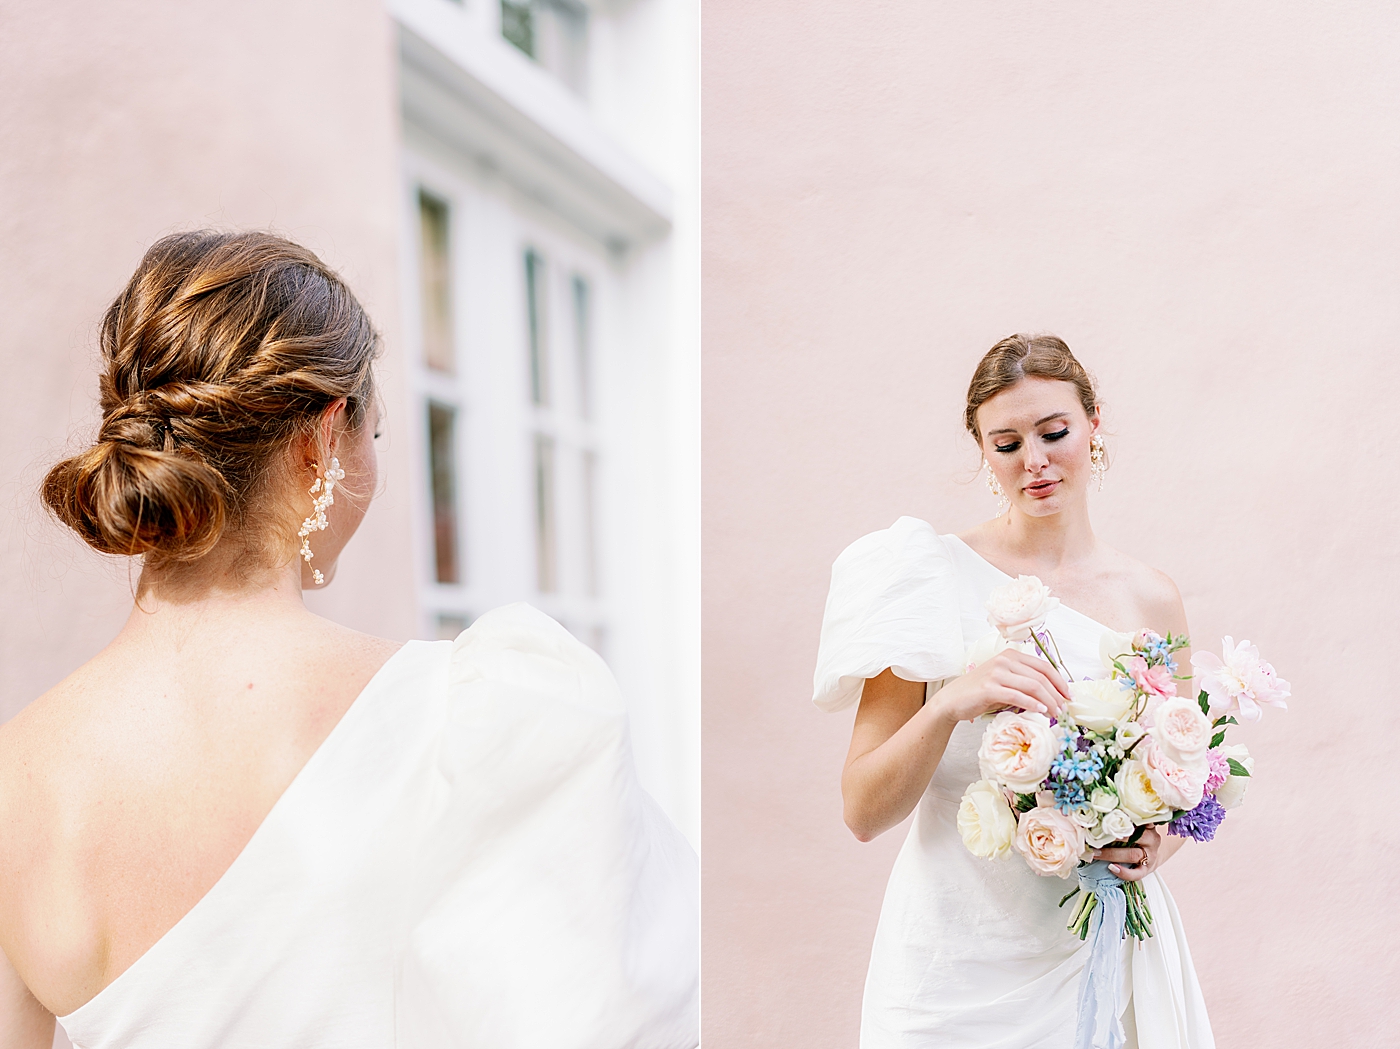 Detail of brides hair during Elevated City Hall Elopement in Charleston | Images by Annie Laura Photo